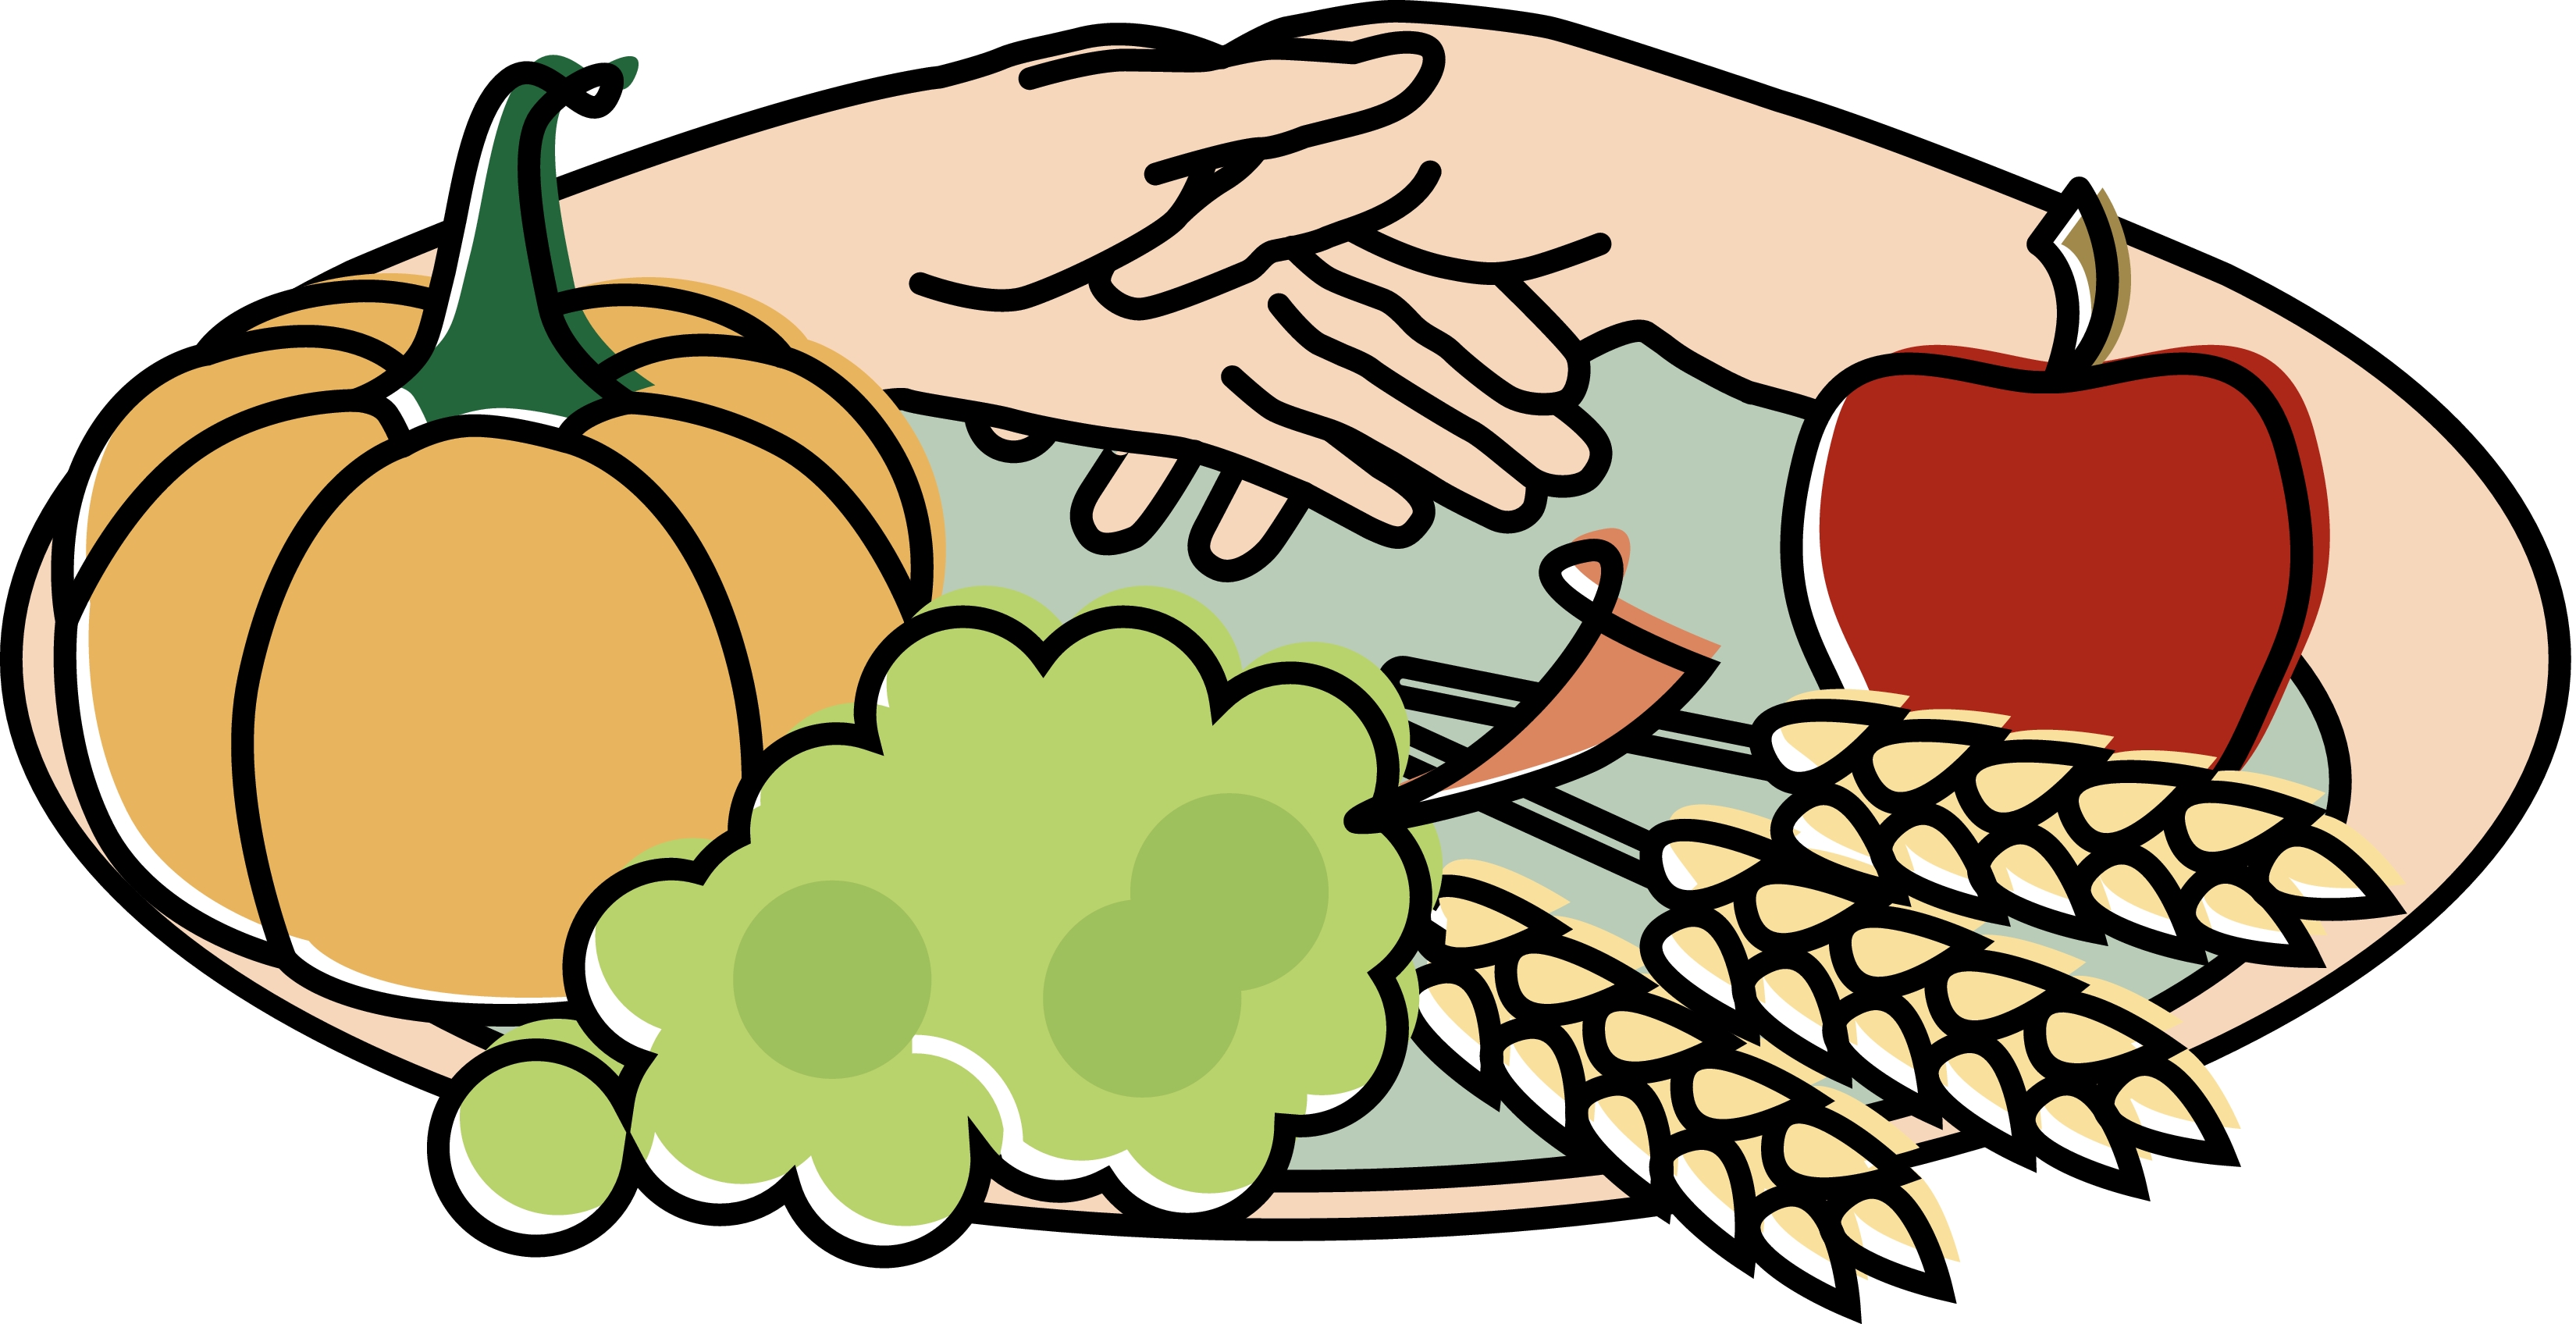 Christian community meal clipart